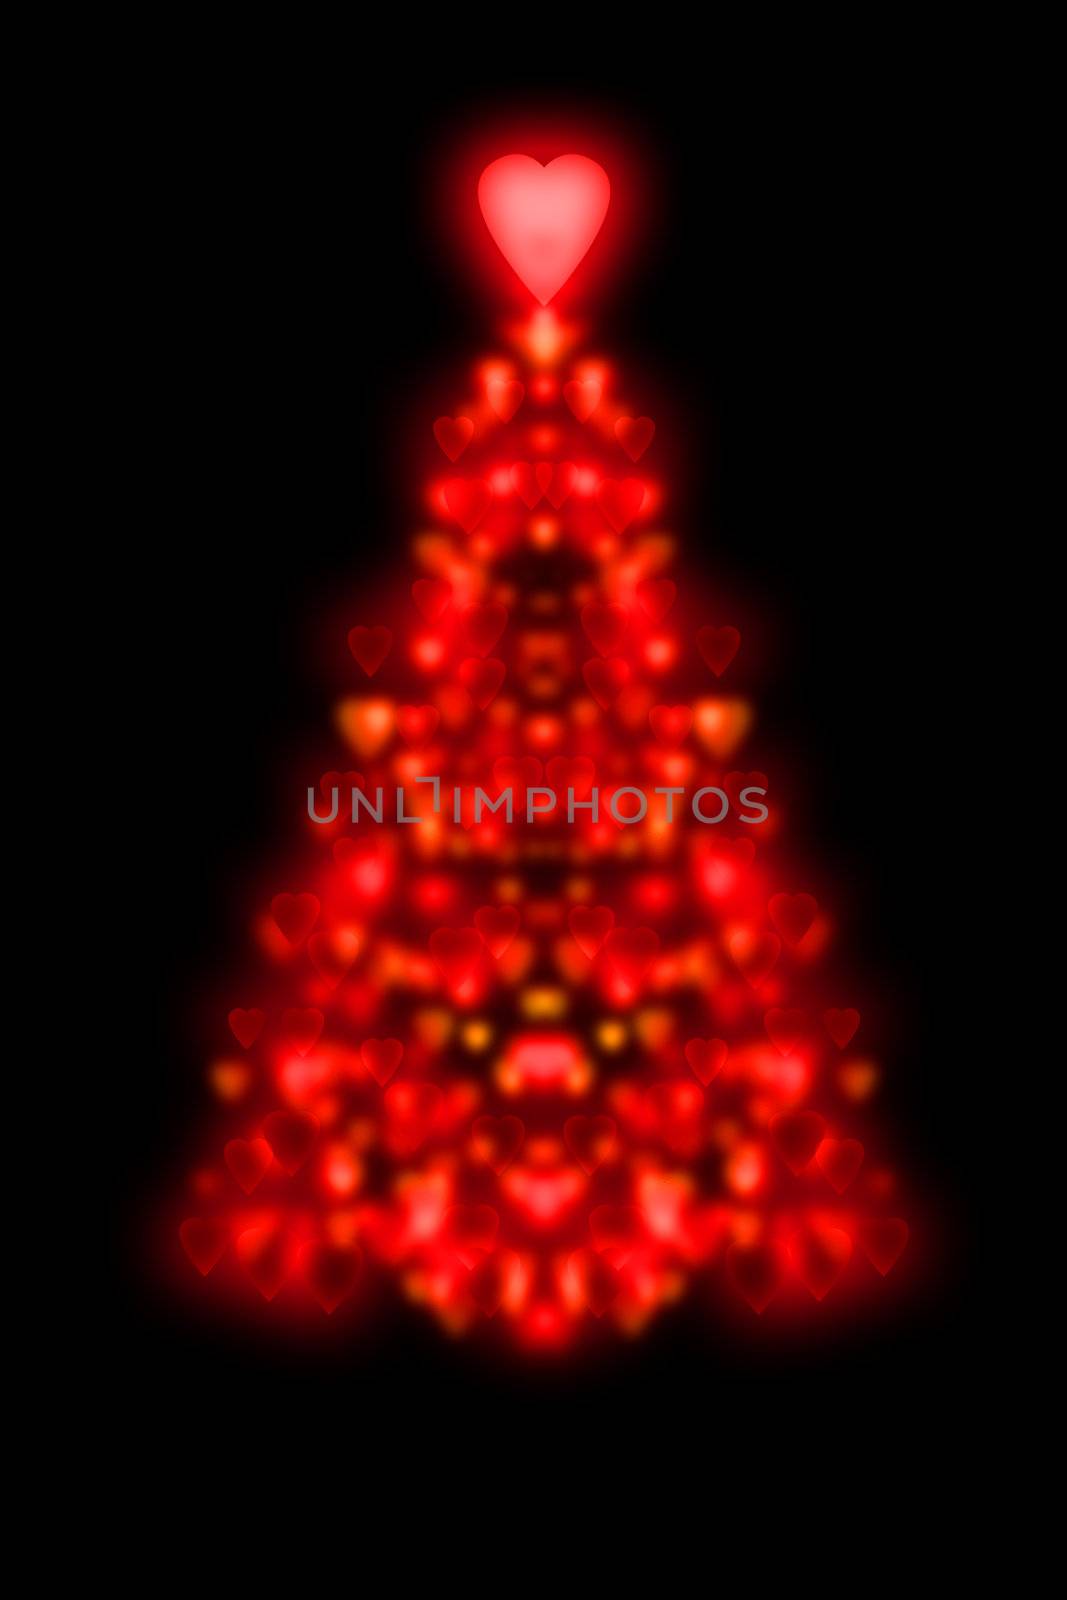 Red Christmas tree shape formed from glowing red hearts